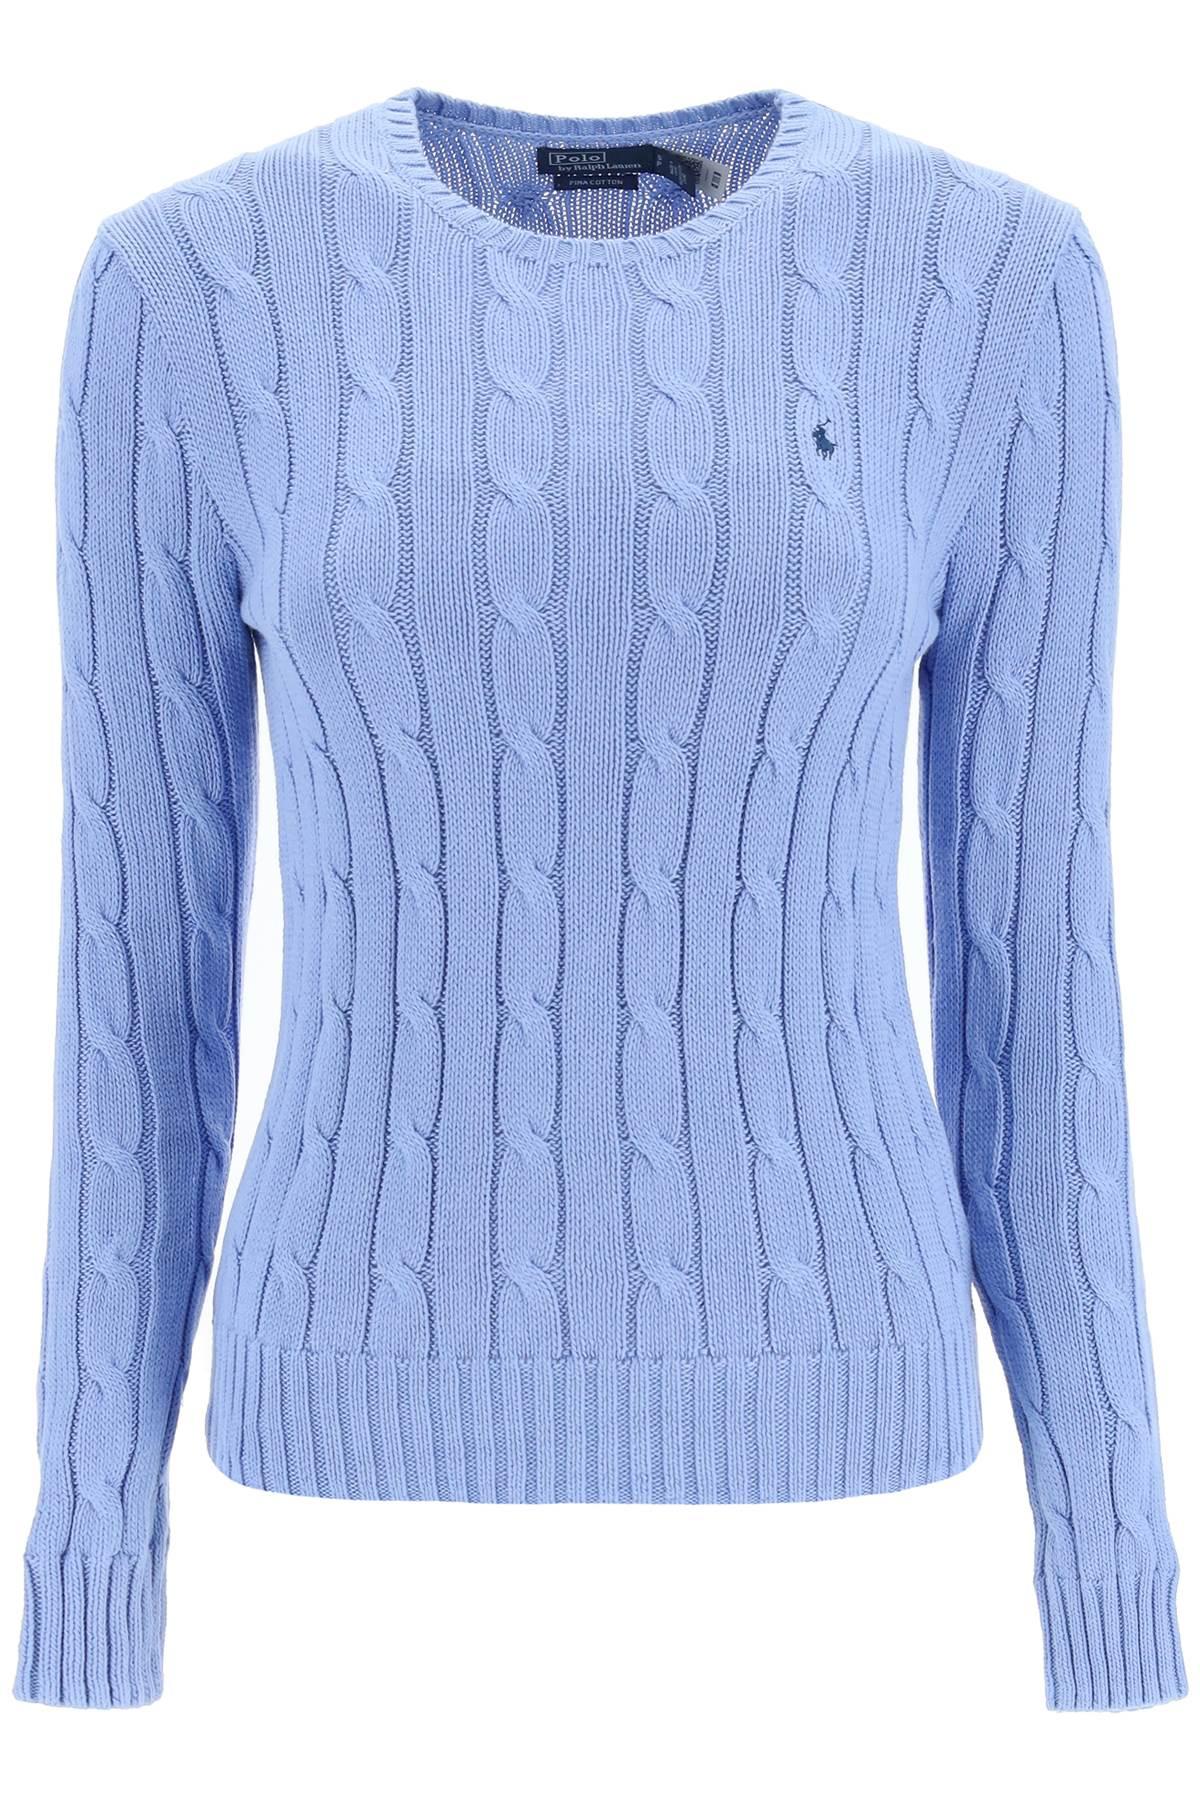 Polo Ralph Lauren Cable Knit Cotton Sweater in Blue | Lyst